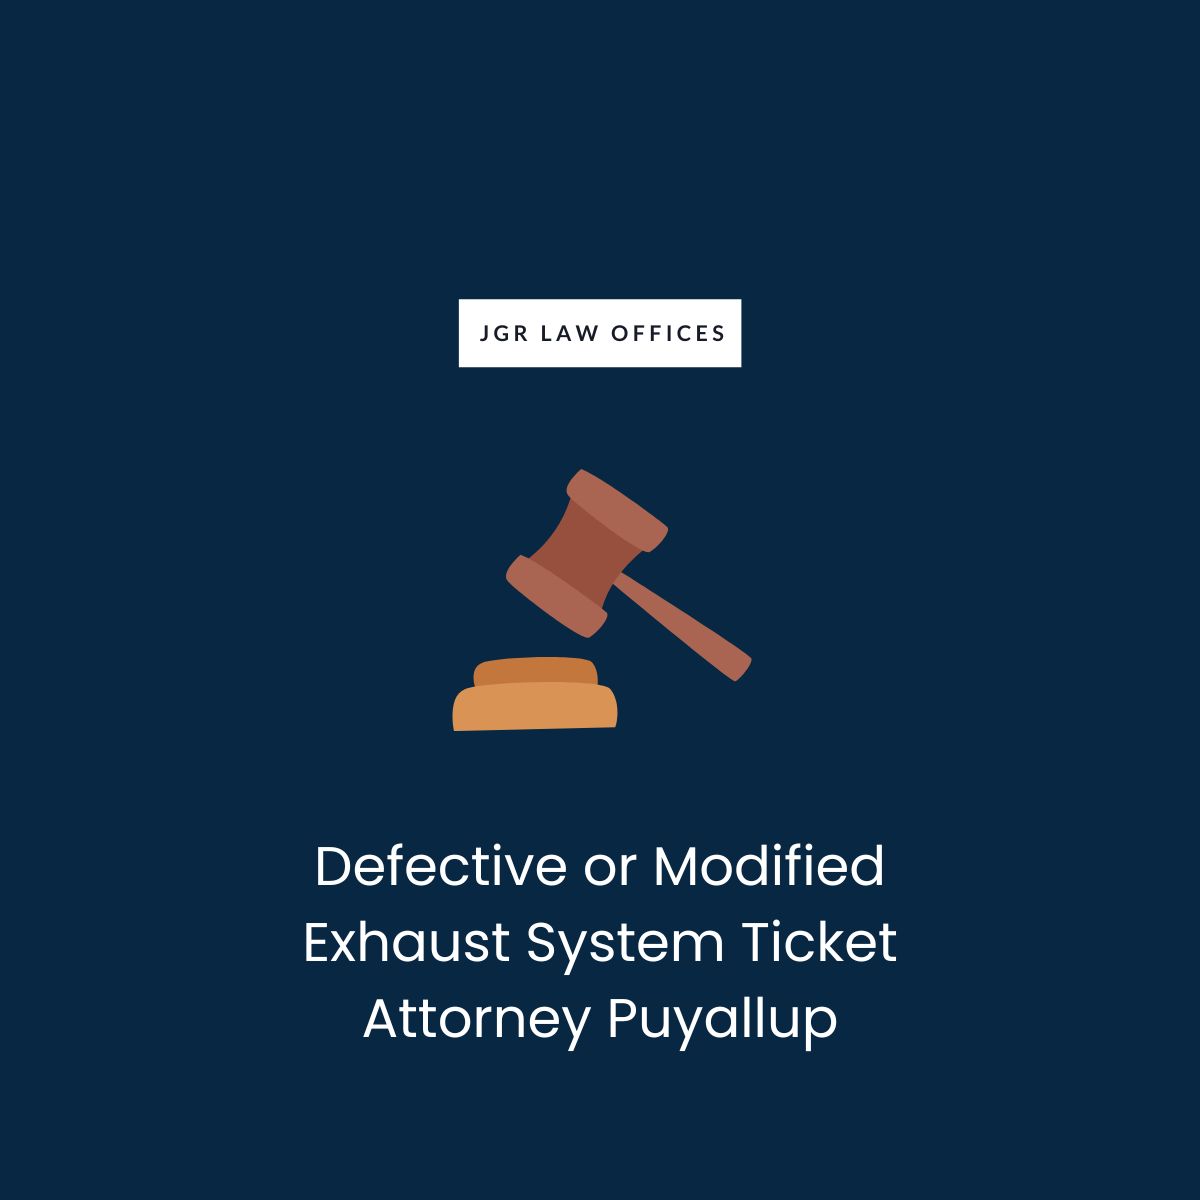 Defective or Modified Exhaust System Ticket Attorney Puyallup